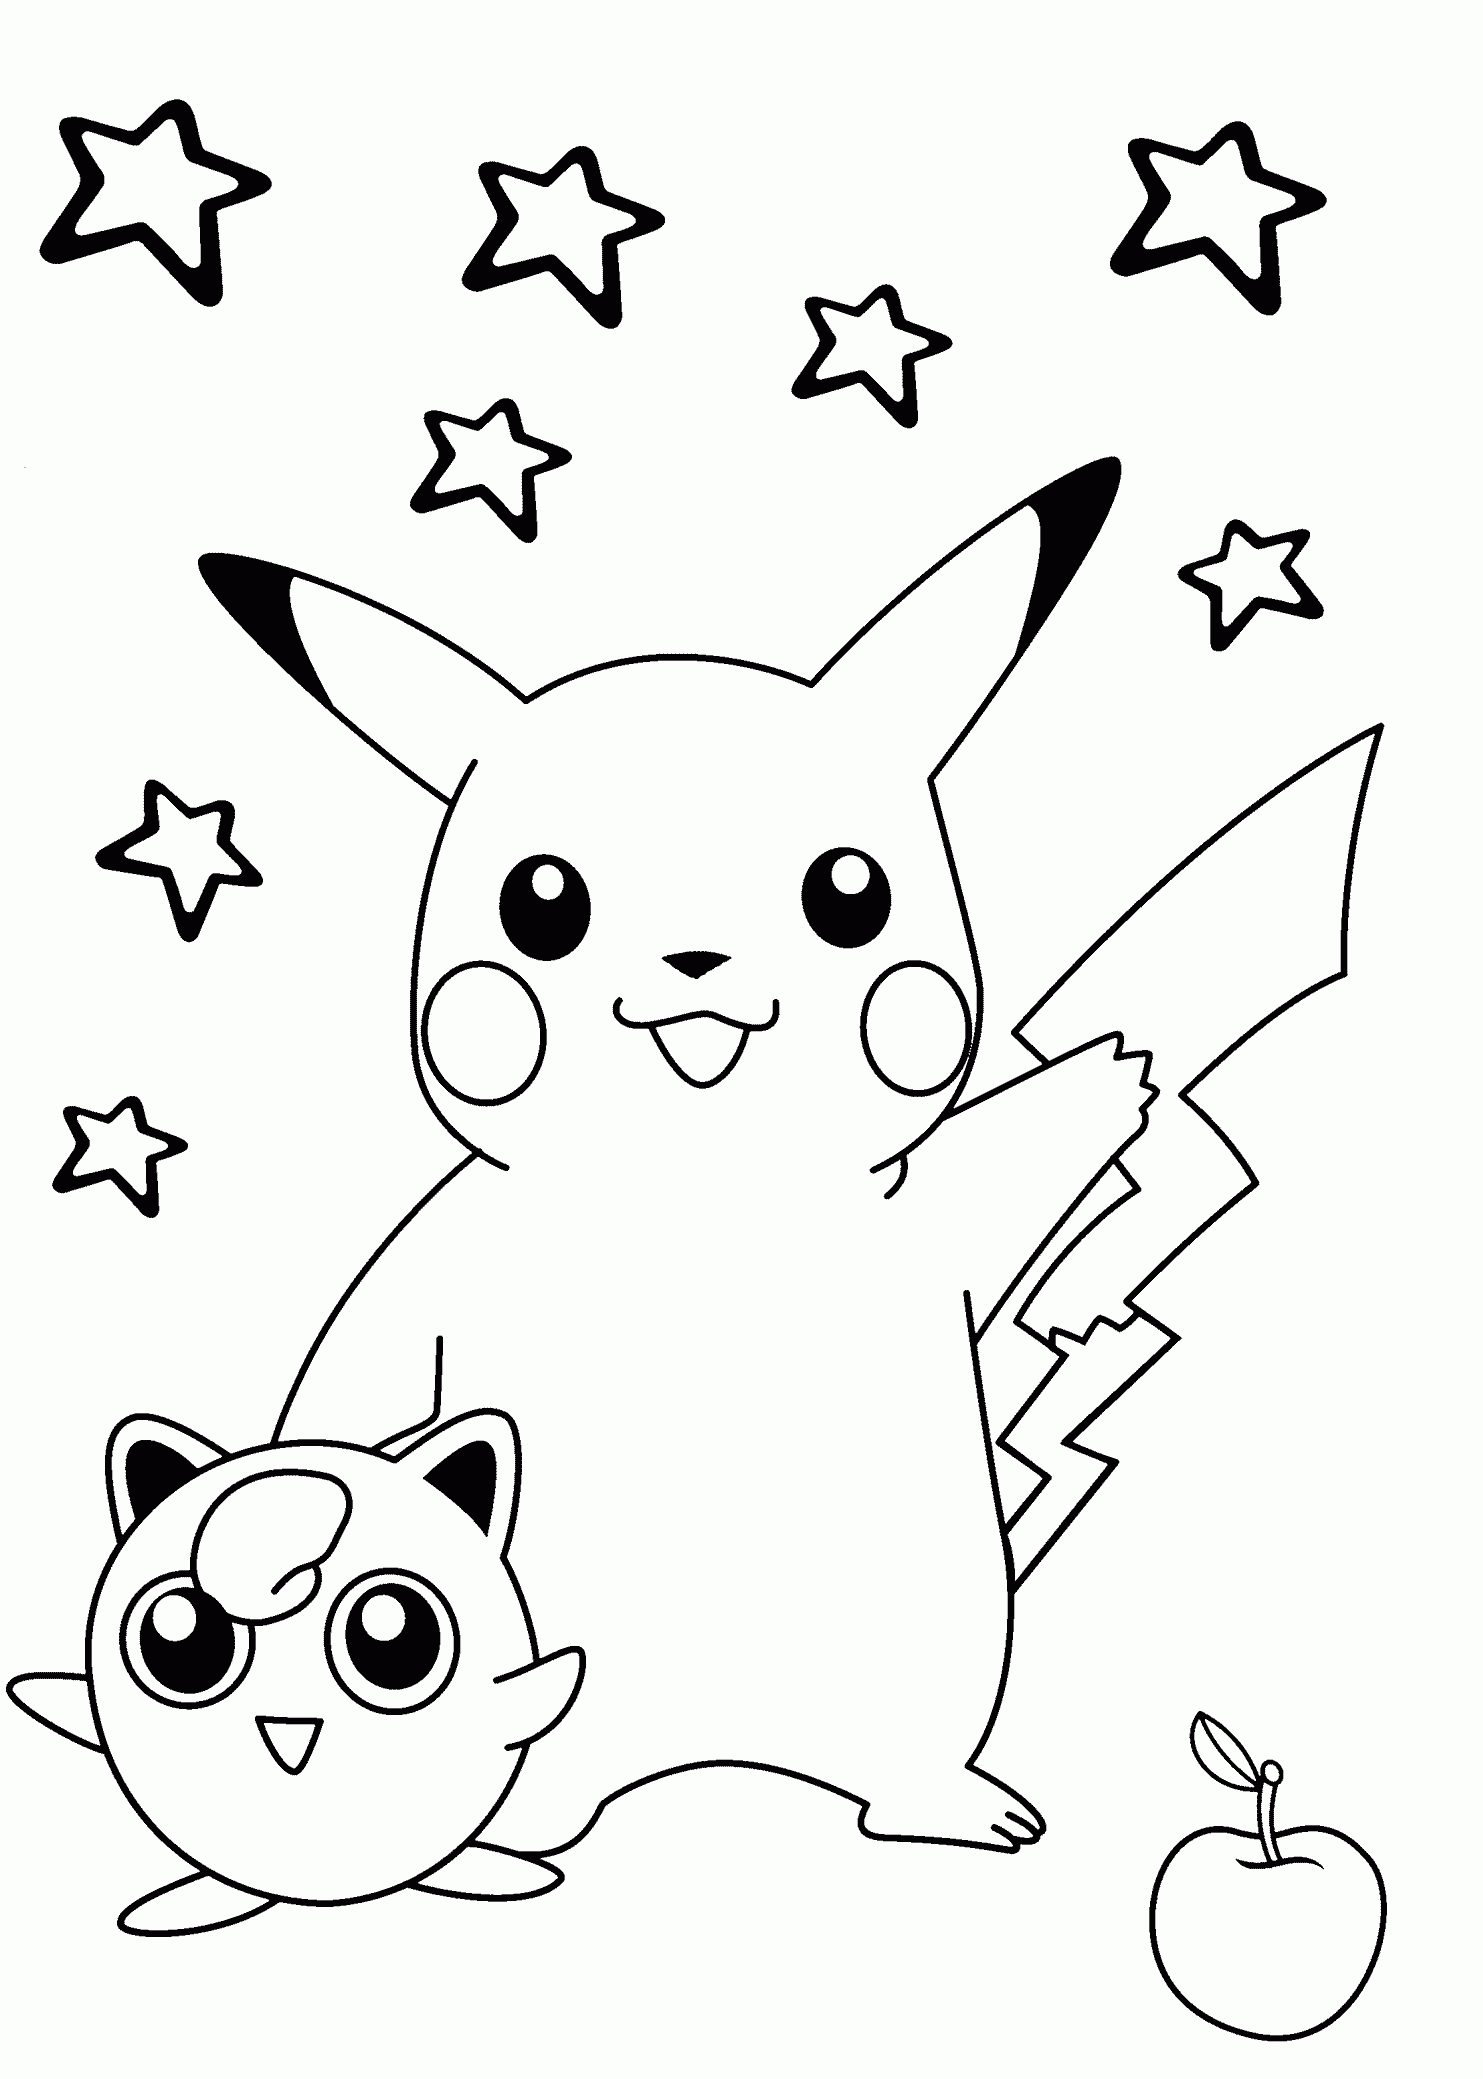 Smiling Pokemon Coloring Pages For Kids, Printable Free | Scanncut - Free Printable Pokemon Coloring Pages